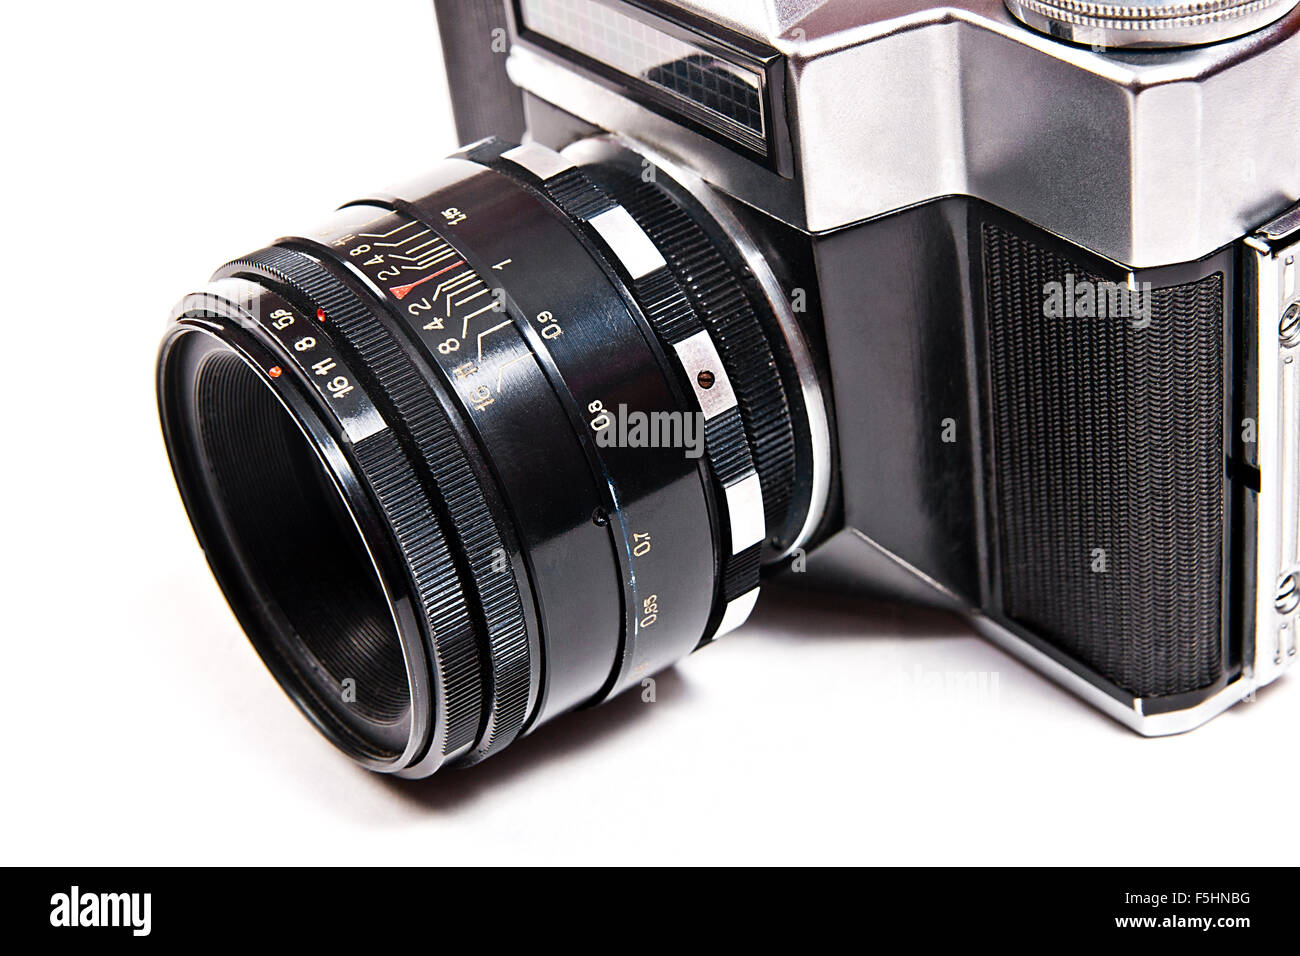 Range finder camera with lens. Close up view part of old retro photo camera. Classic black manual film camera isolated on white Stock Photo